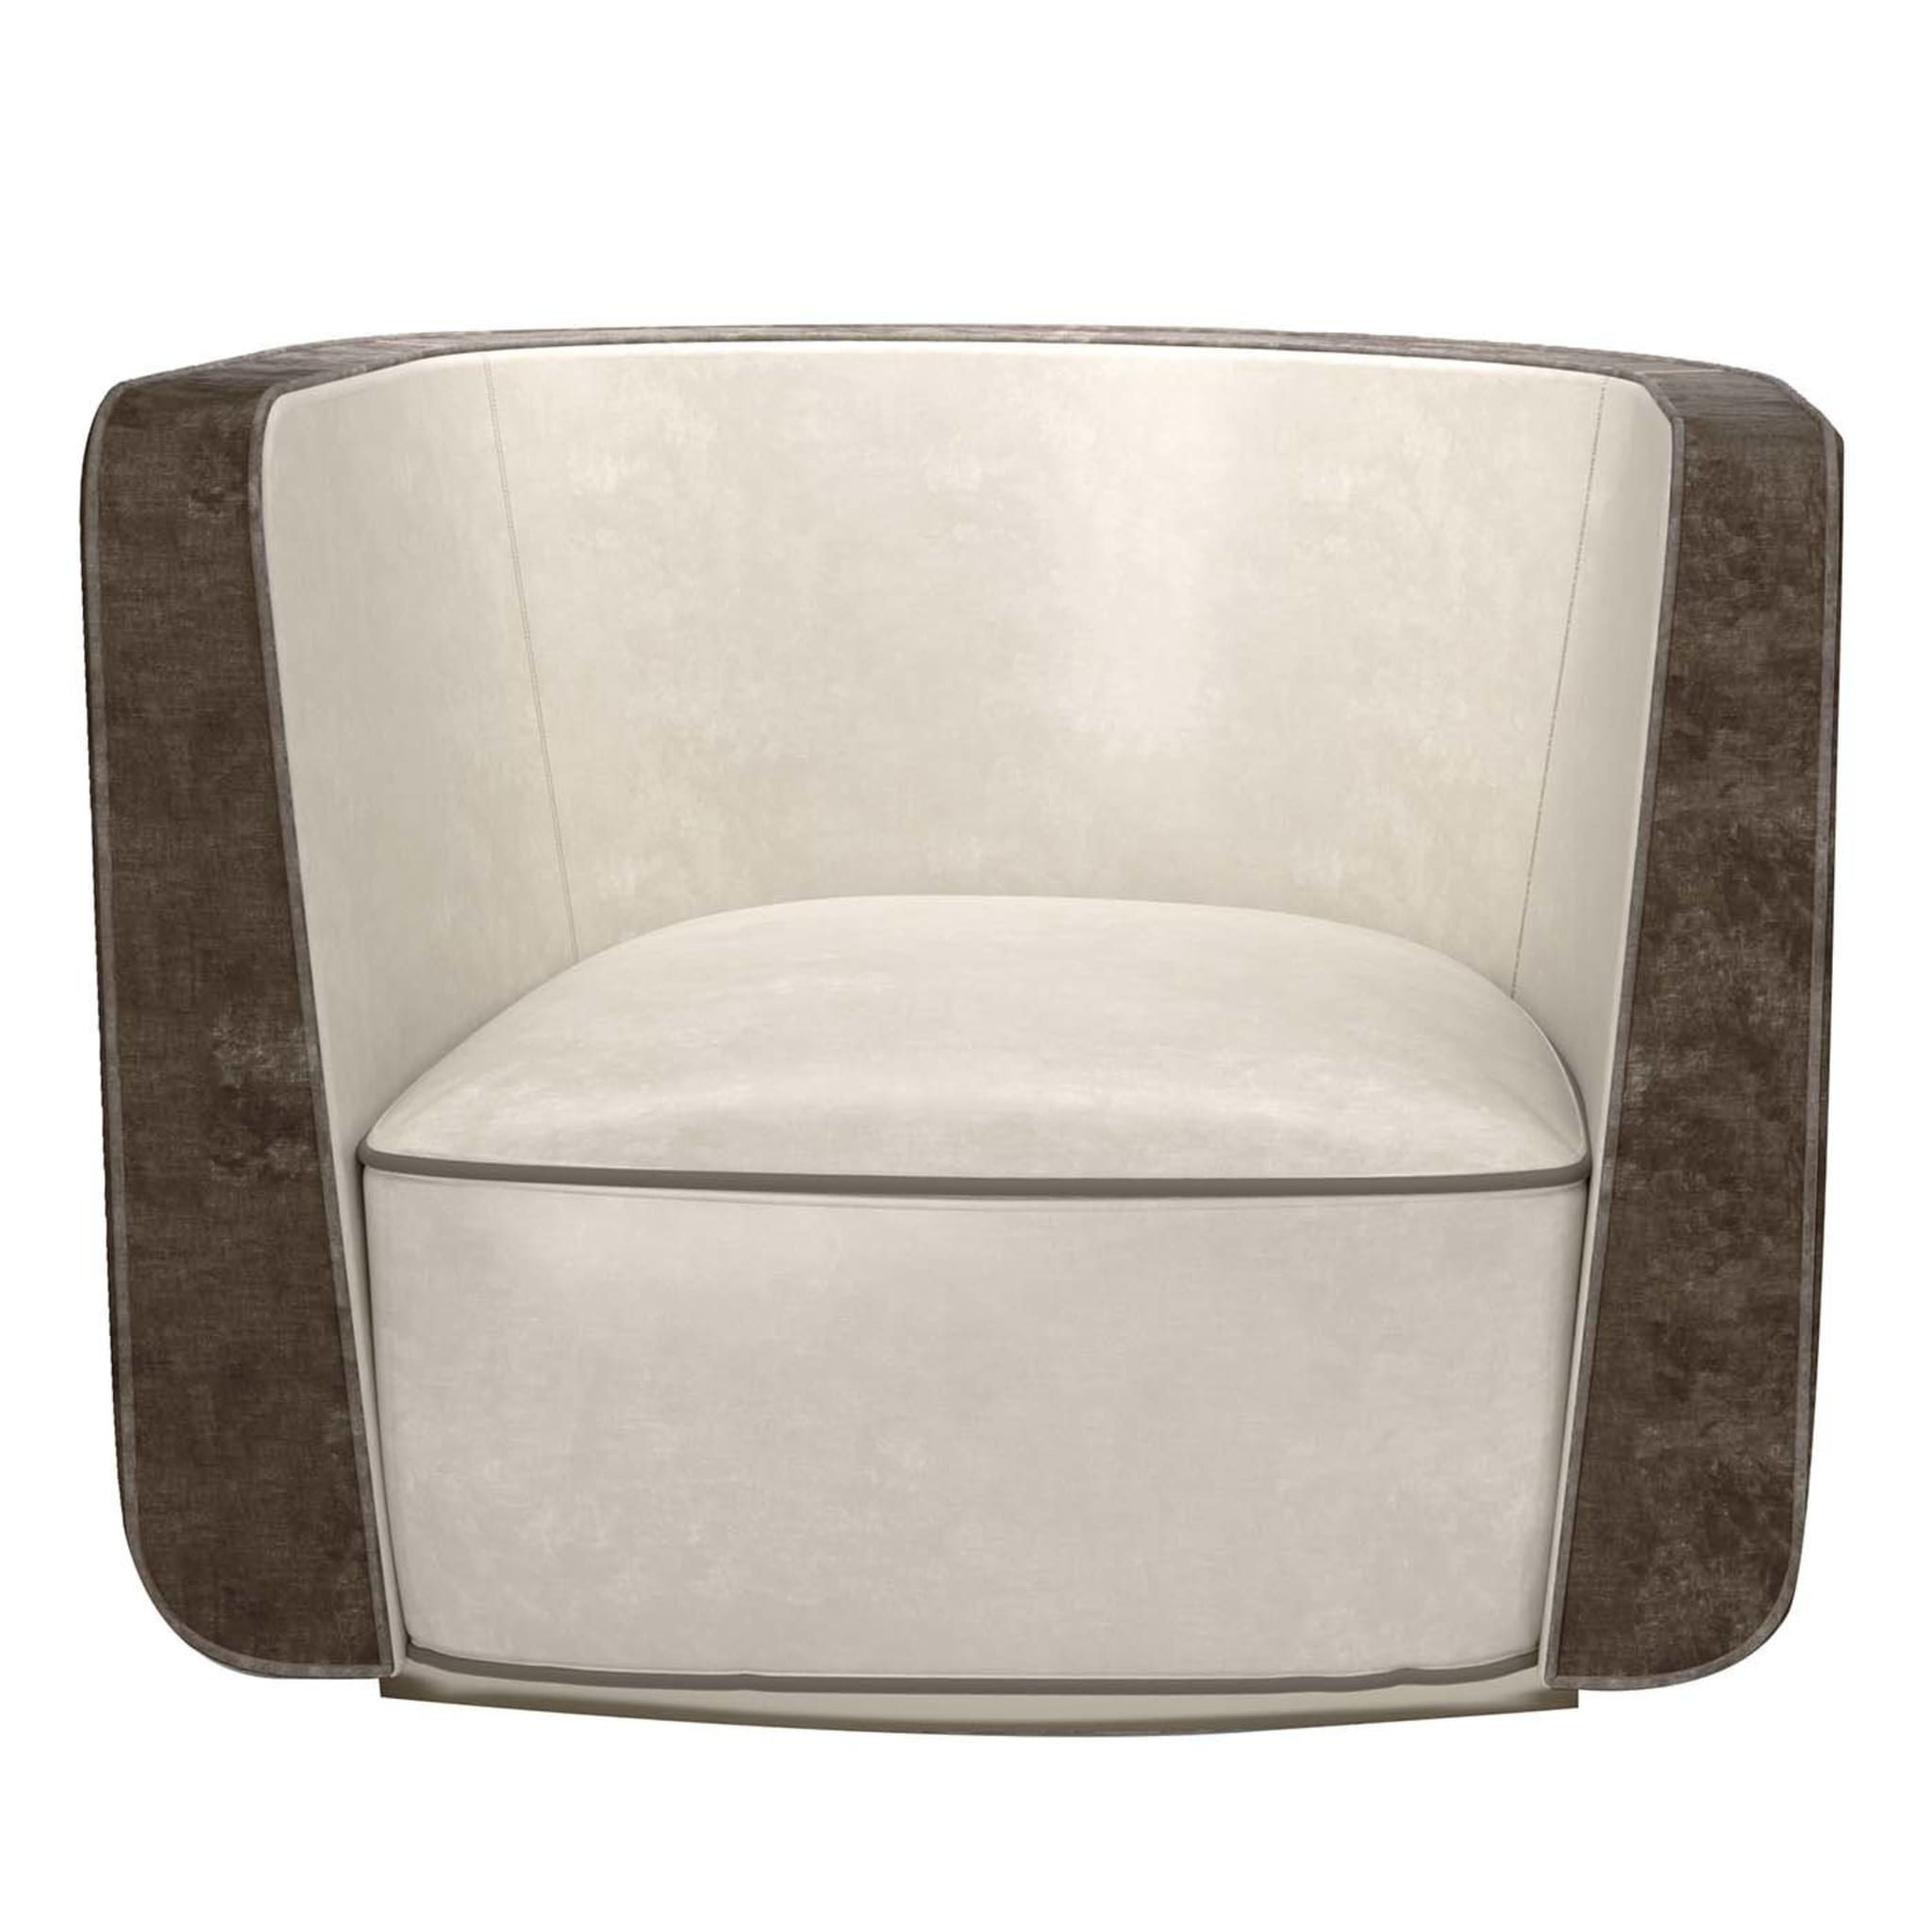 Ponza White and Taupe Swivel Armchair - Main view